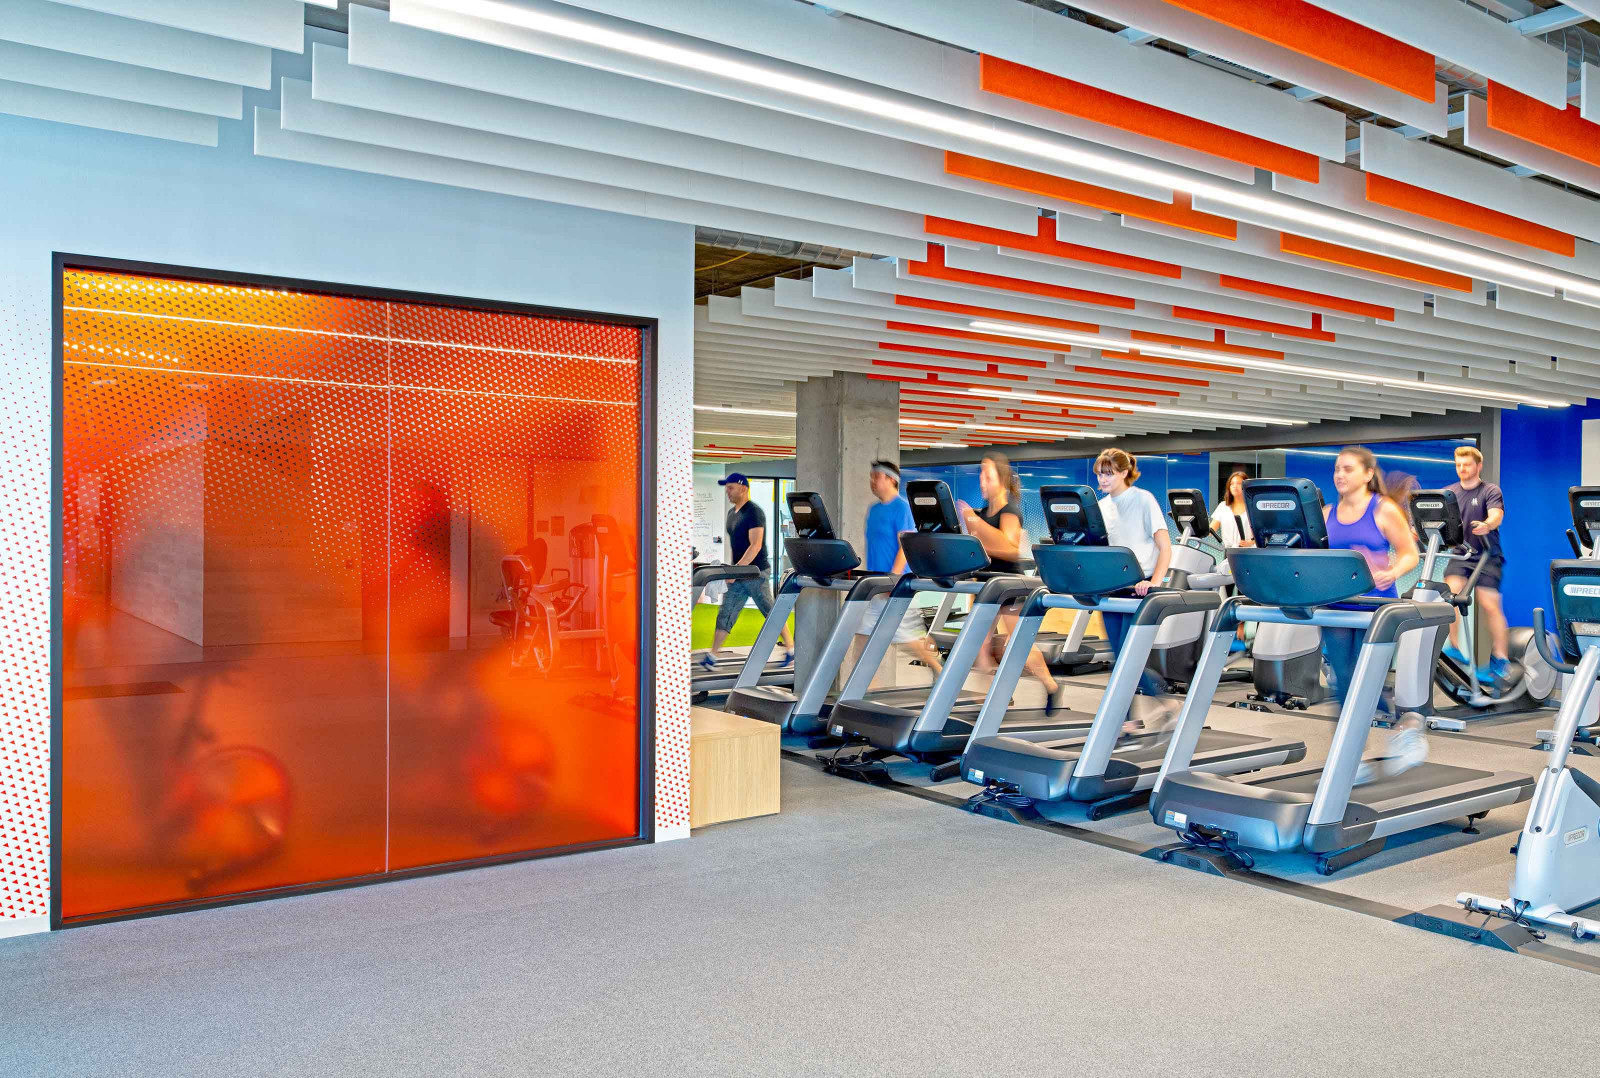 Linear Modules Project a Desire to Focus When Exercising While Keeping Things Quiet